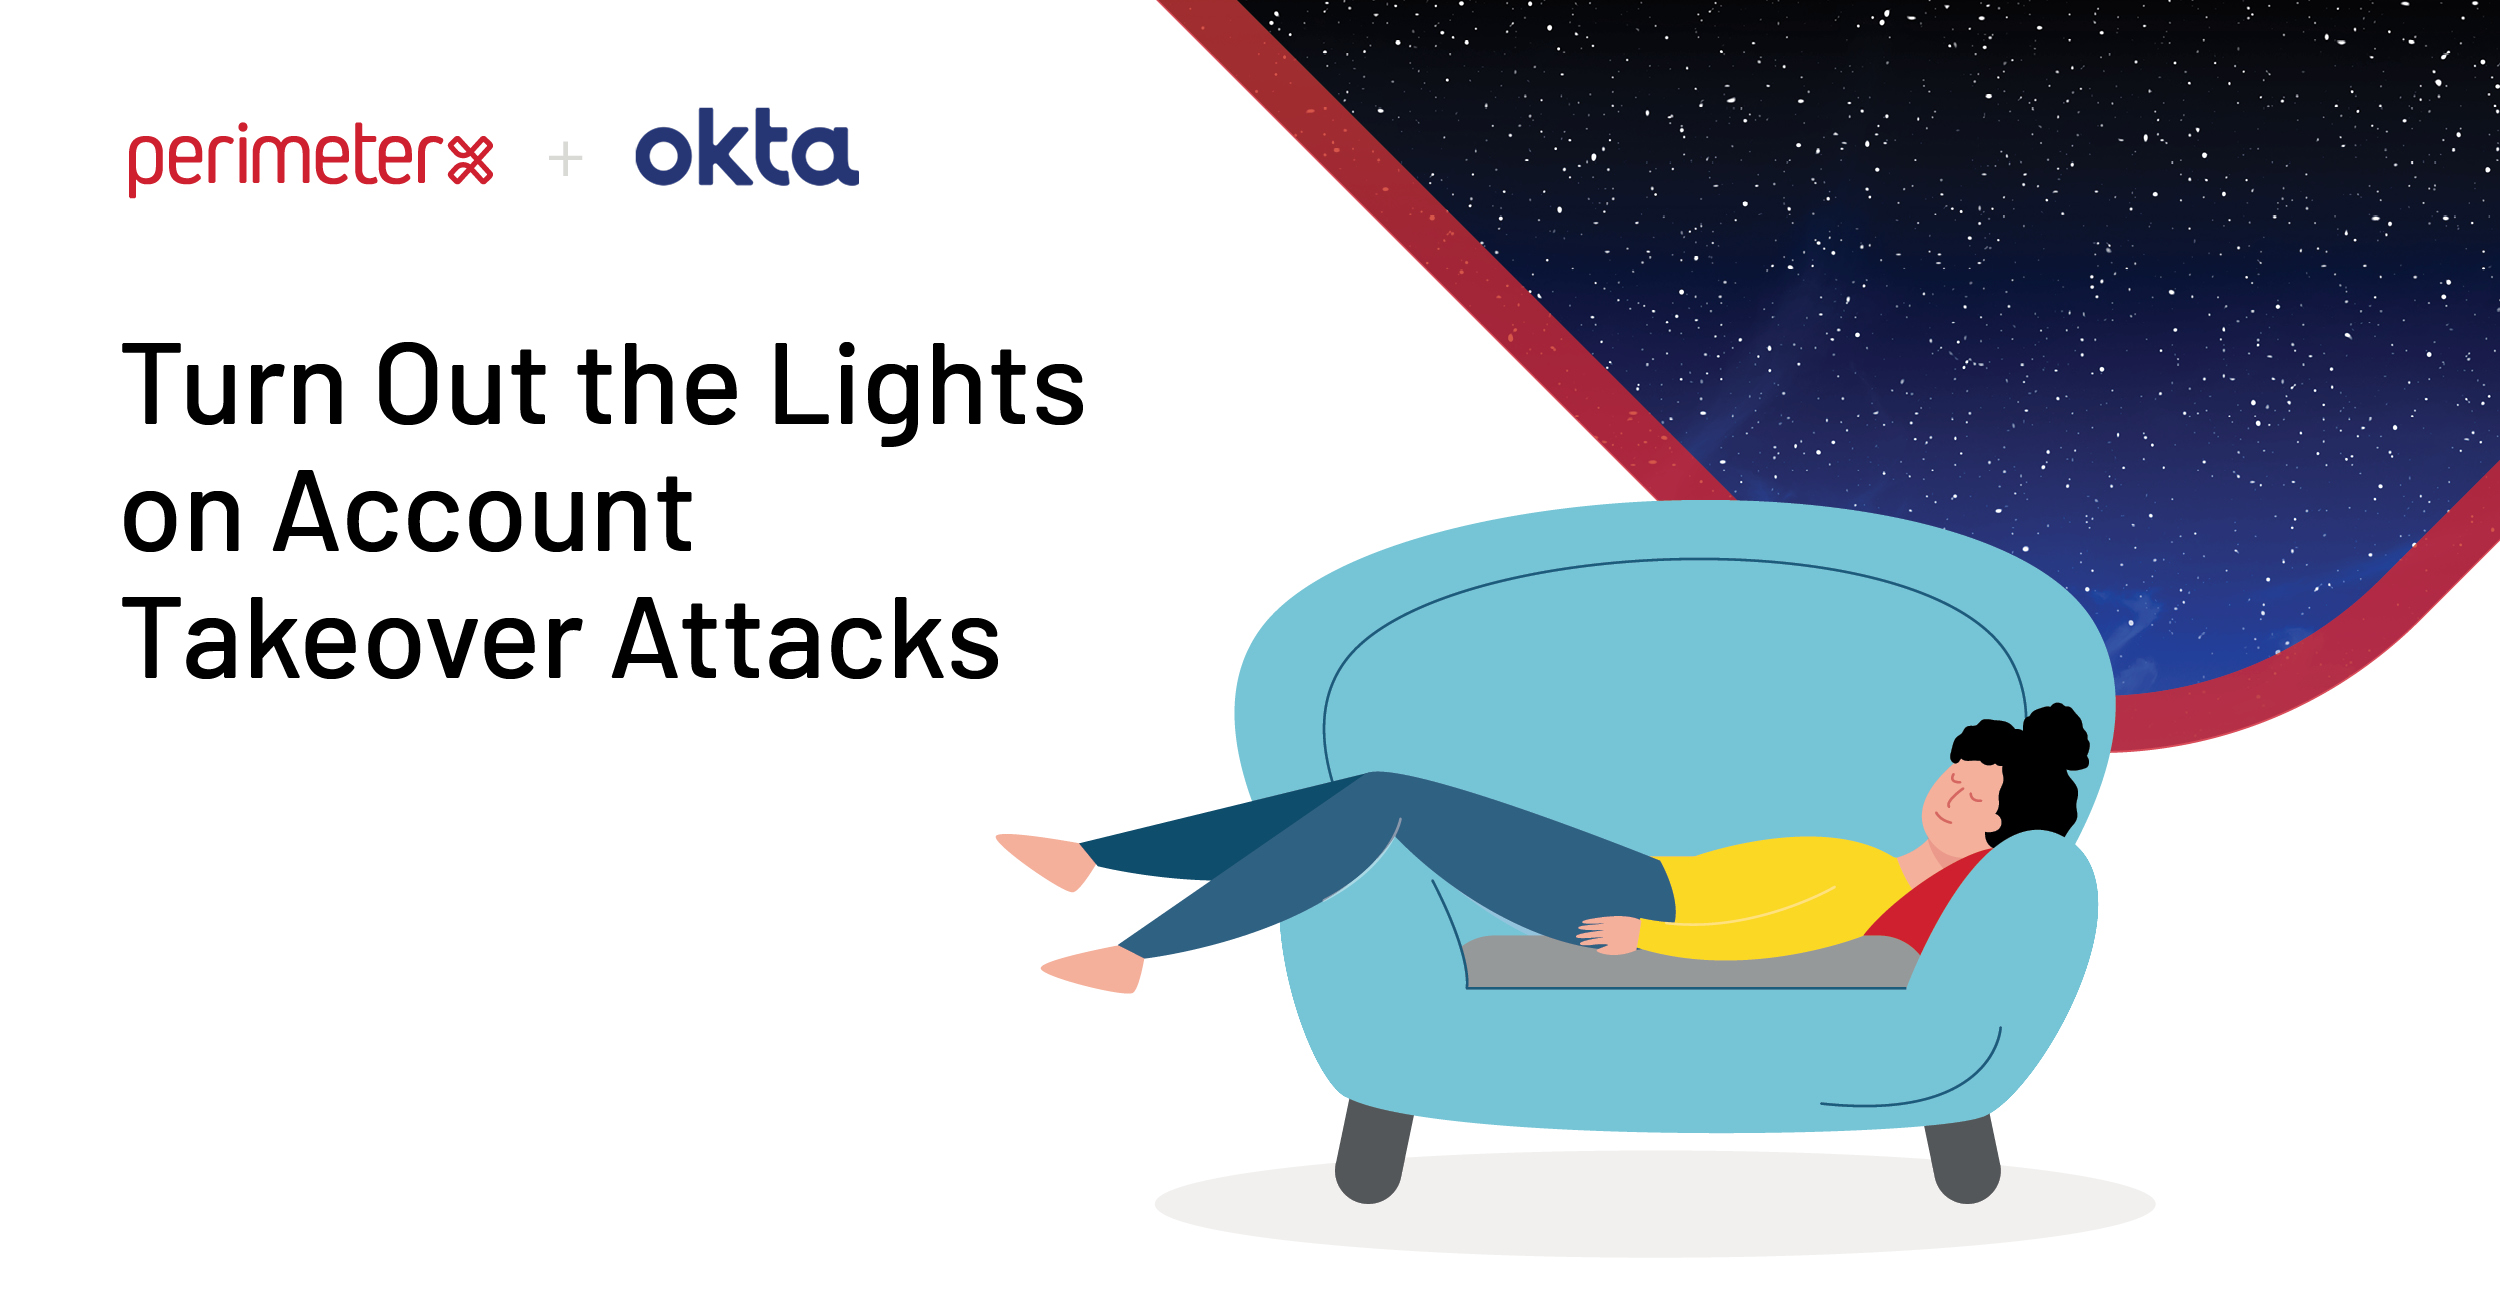 Turn Out the Lights on Account Takeover Attacks